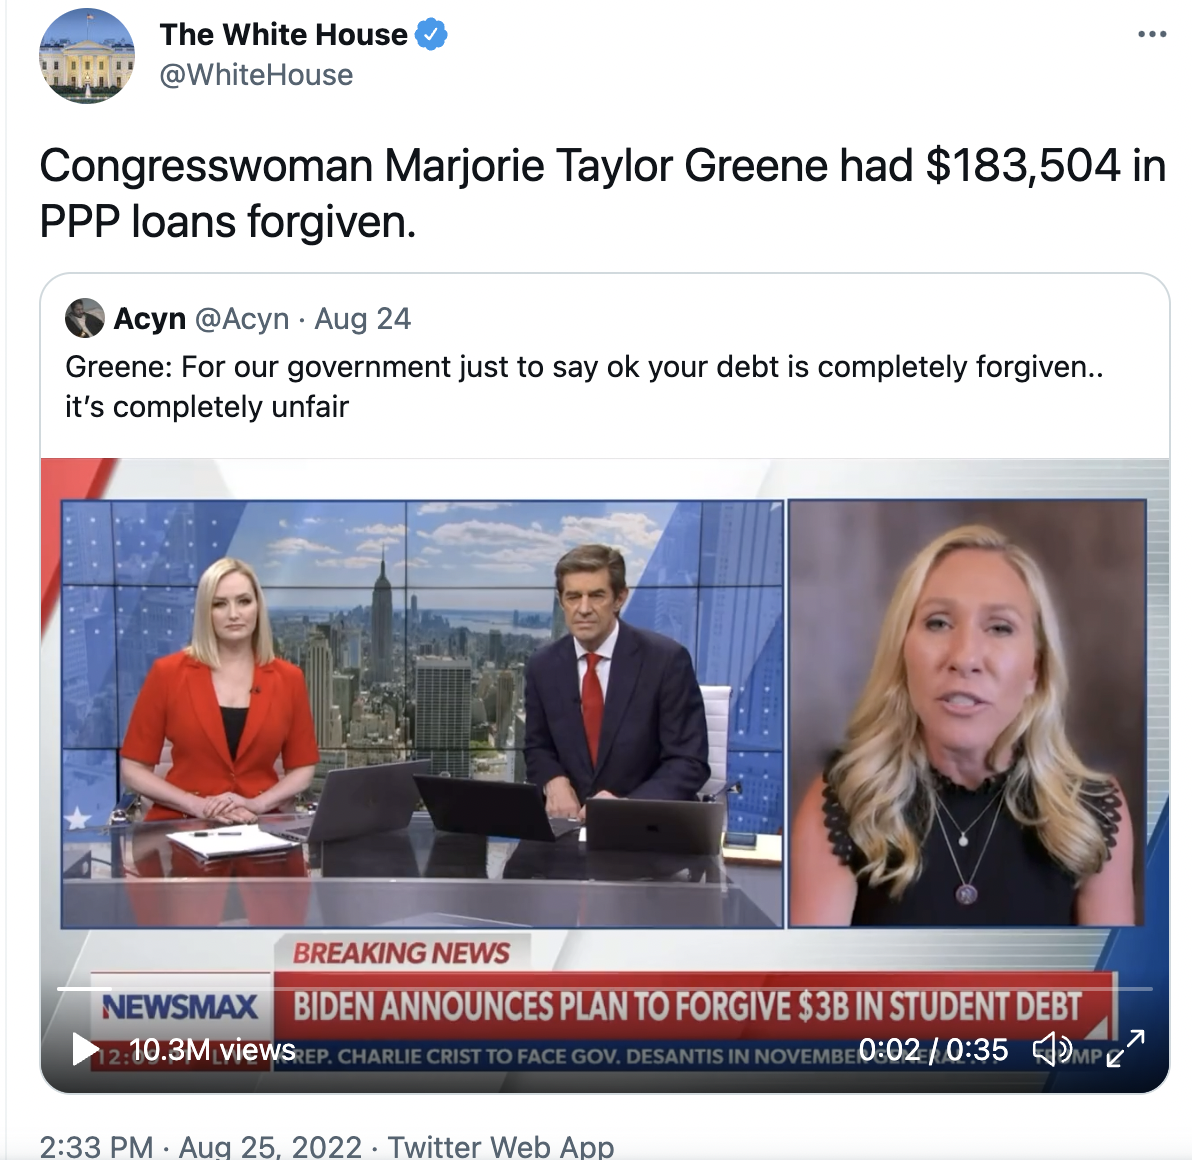 Did Marjorie Taylor Greene Get PPP Mortgage Forgiveness?